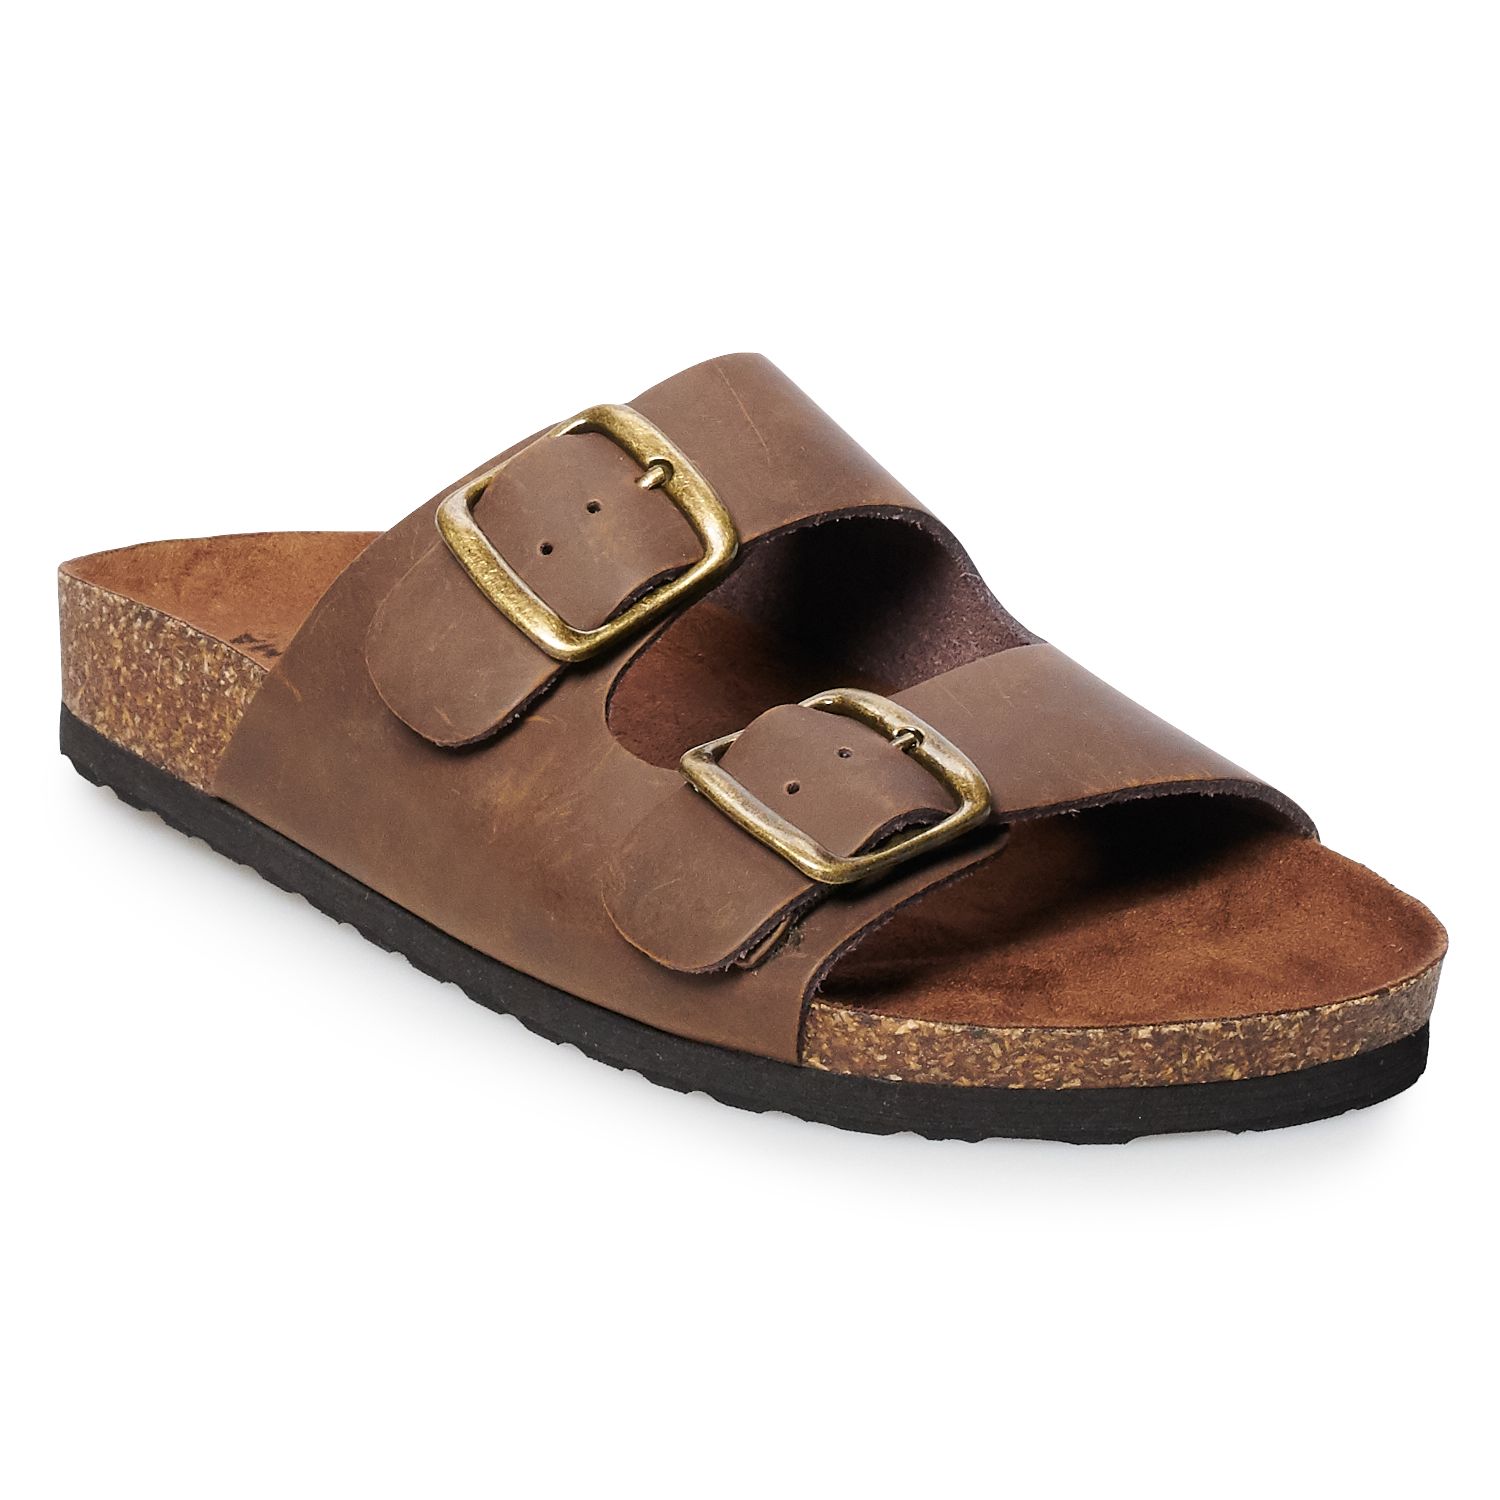 buy sandals online for womens